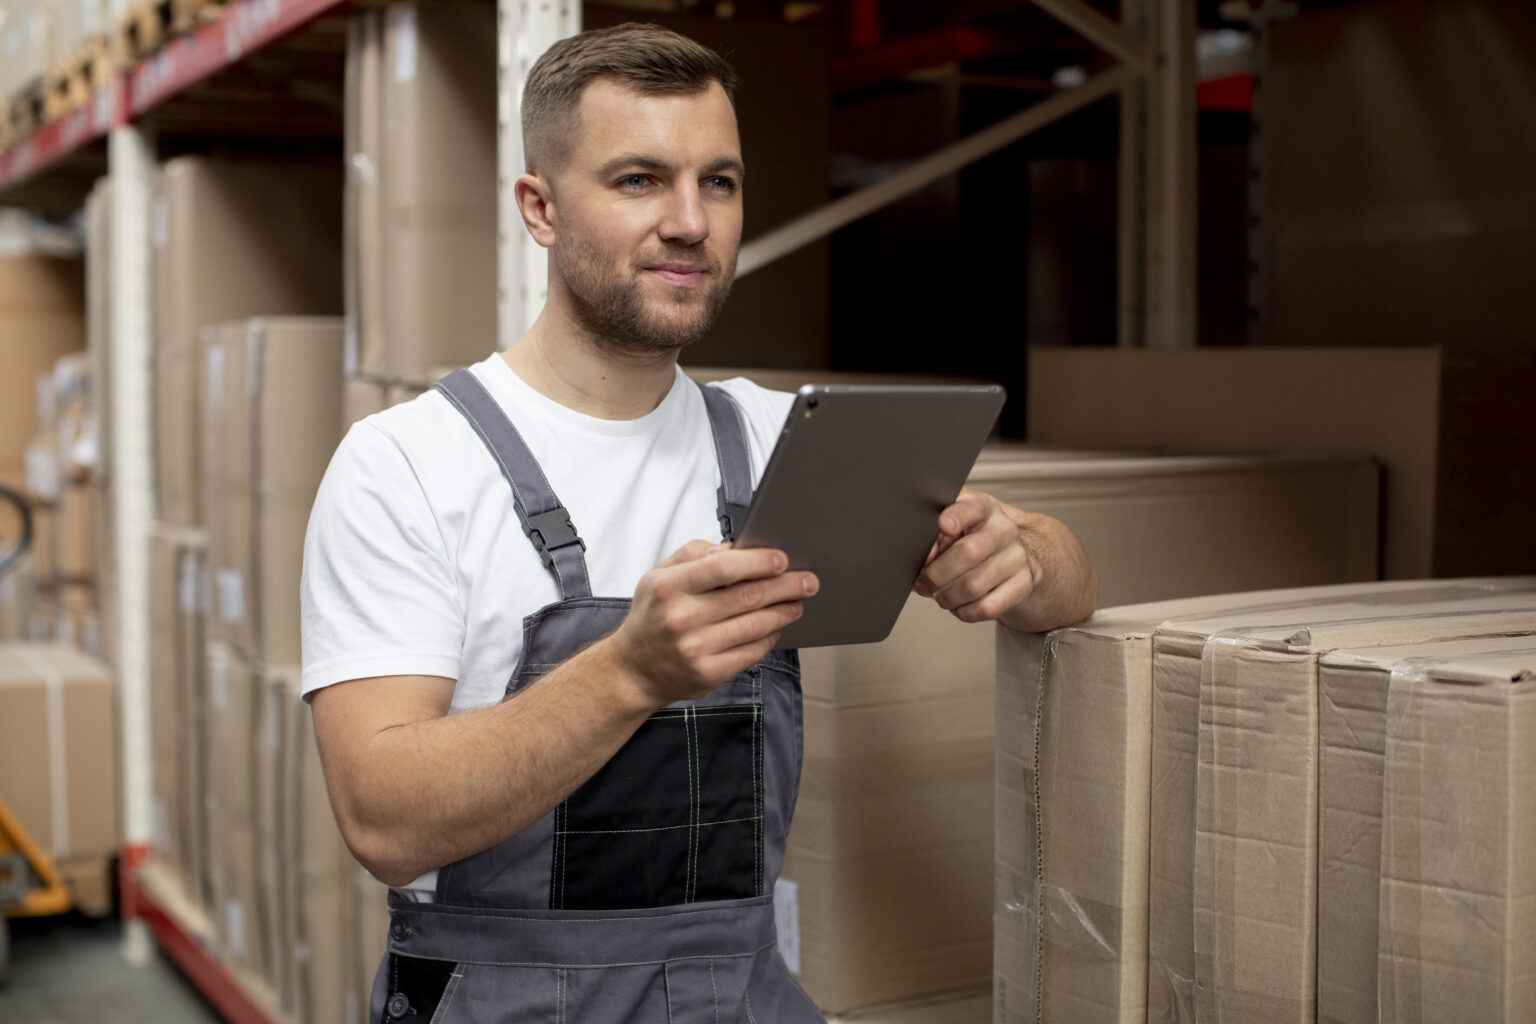 Retail inventory management: The key to smoother operations and enhanced customer experiences